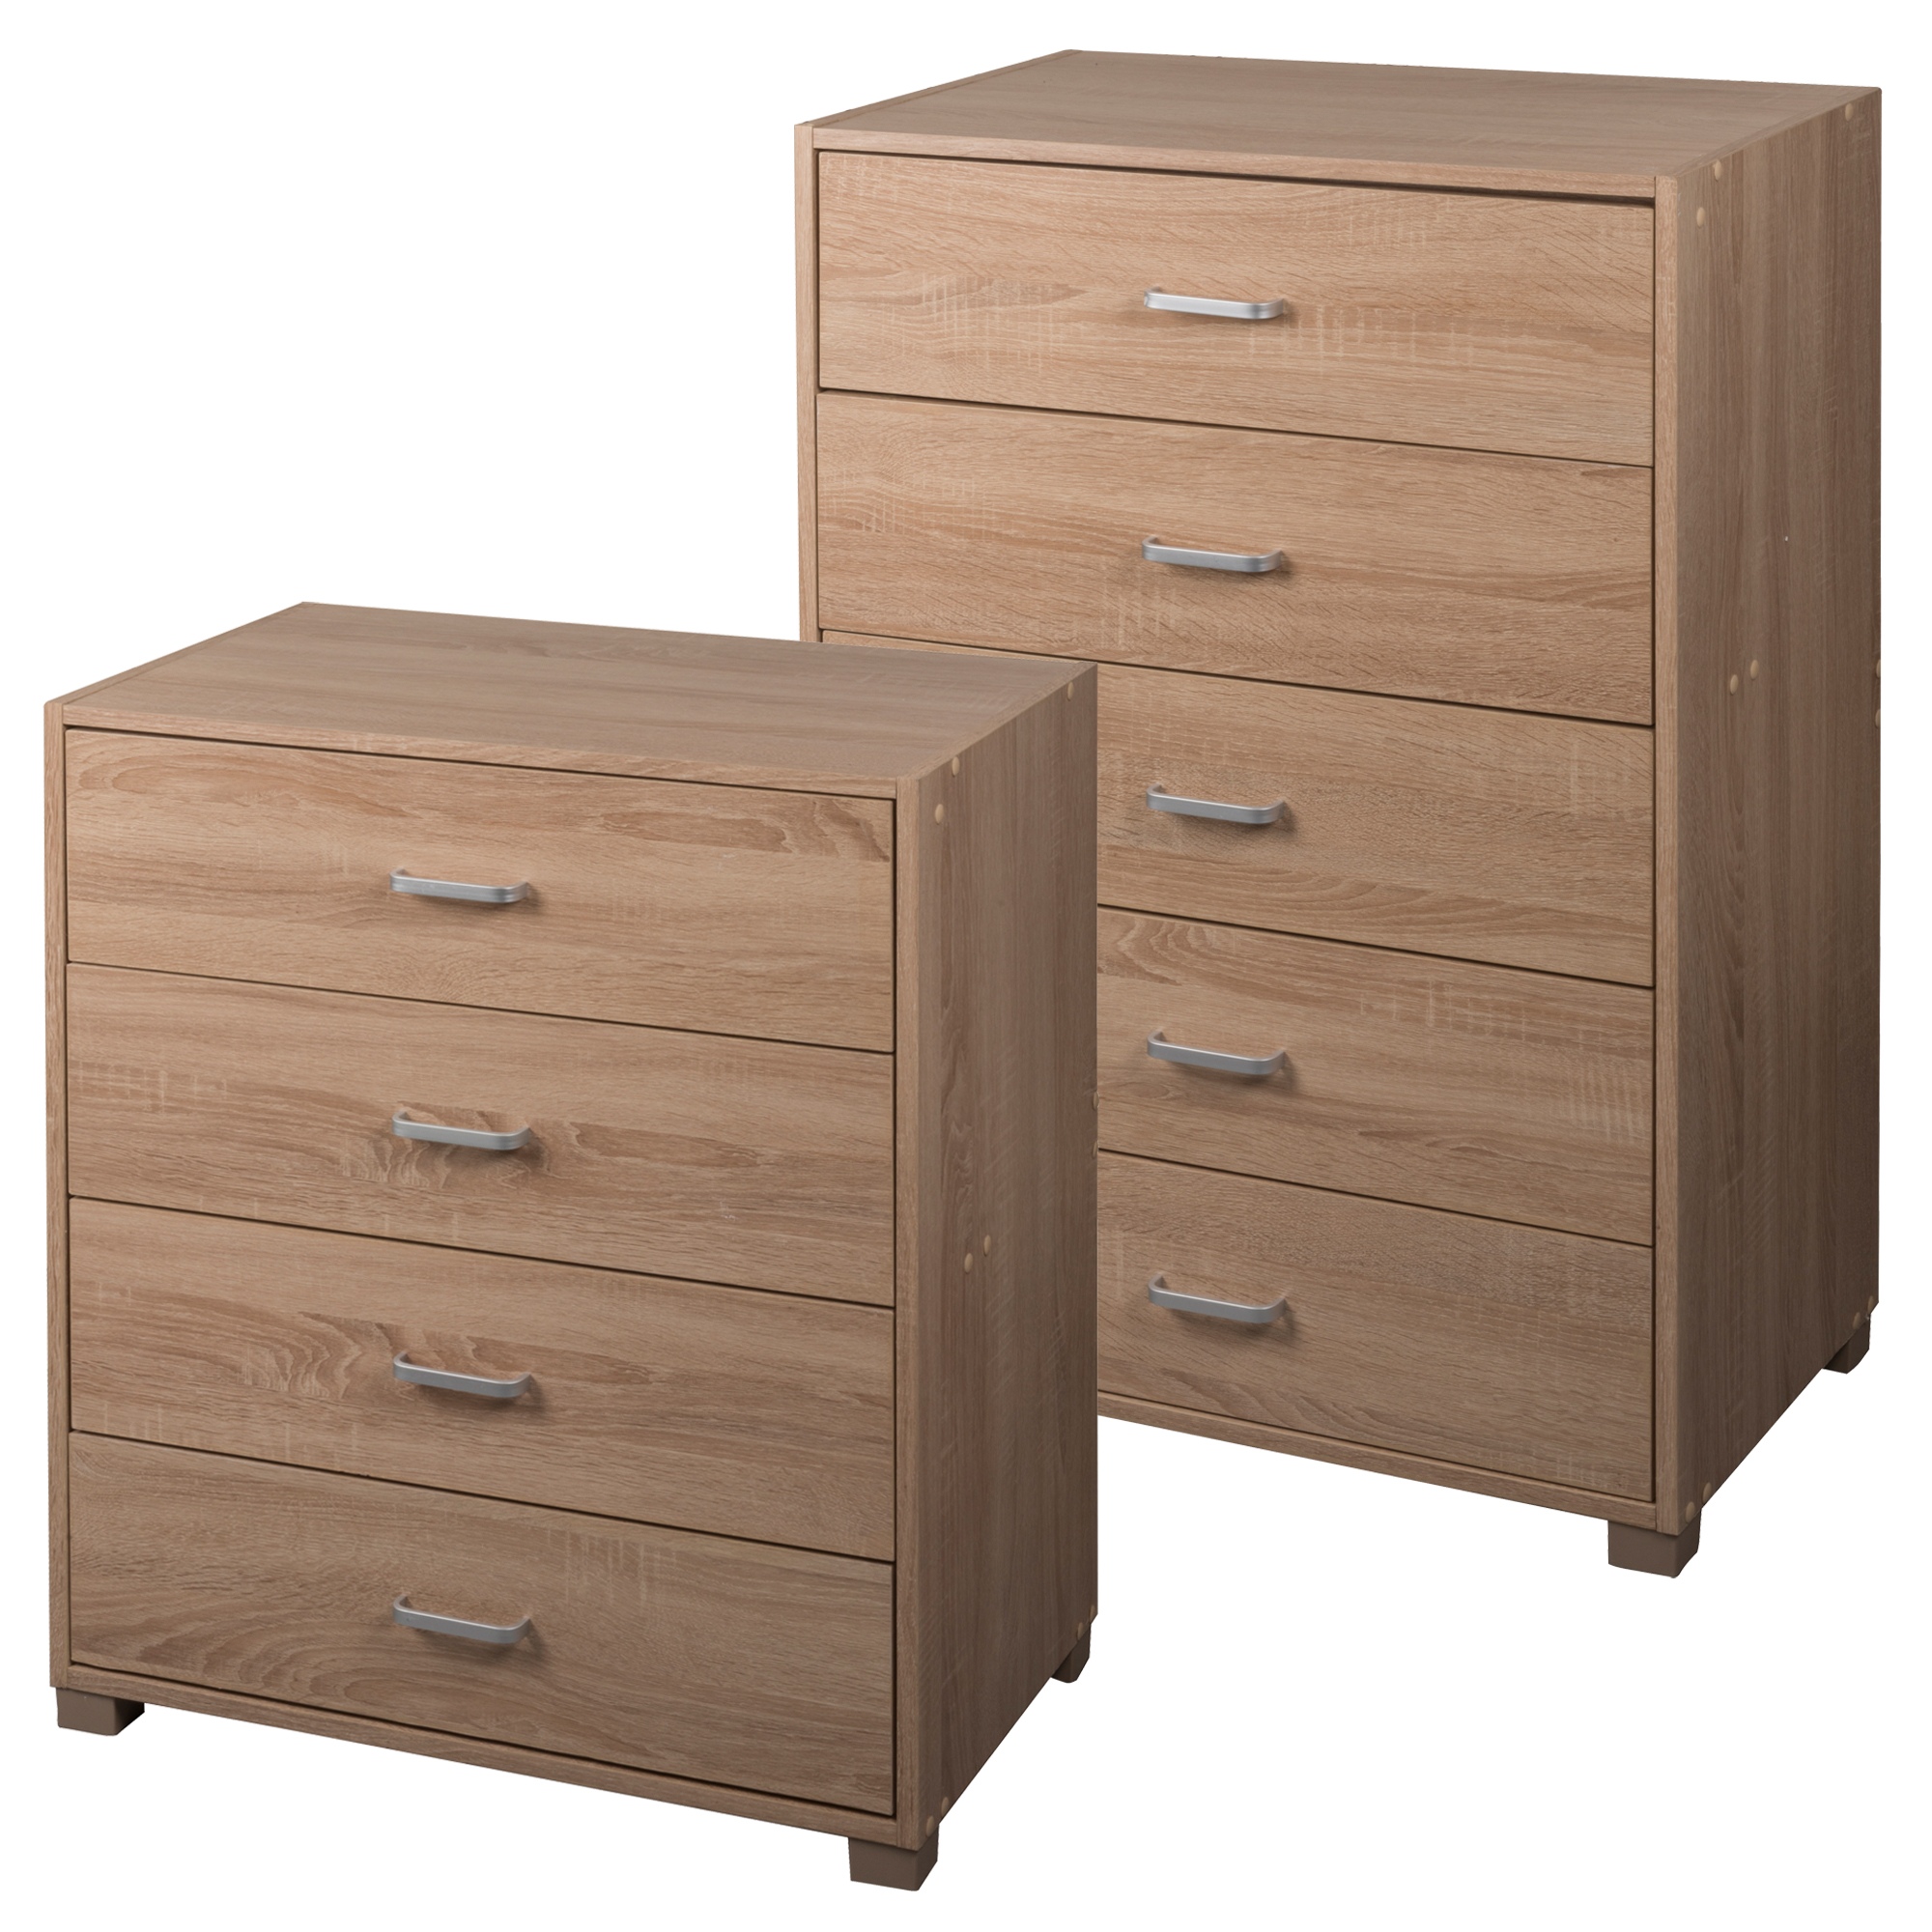 Bedroom Drawers For Clothes / Grayson 6Drawer Chest Attractive